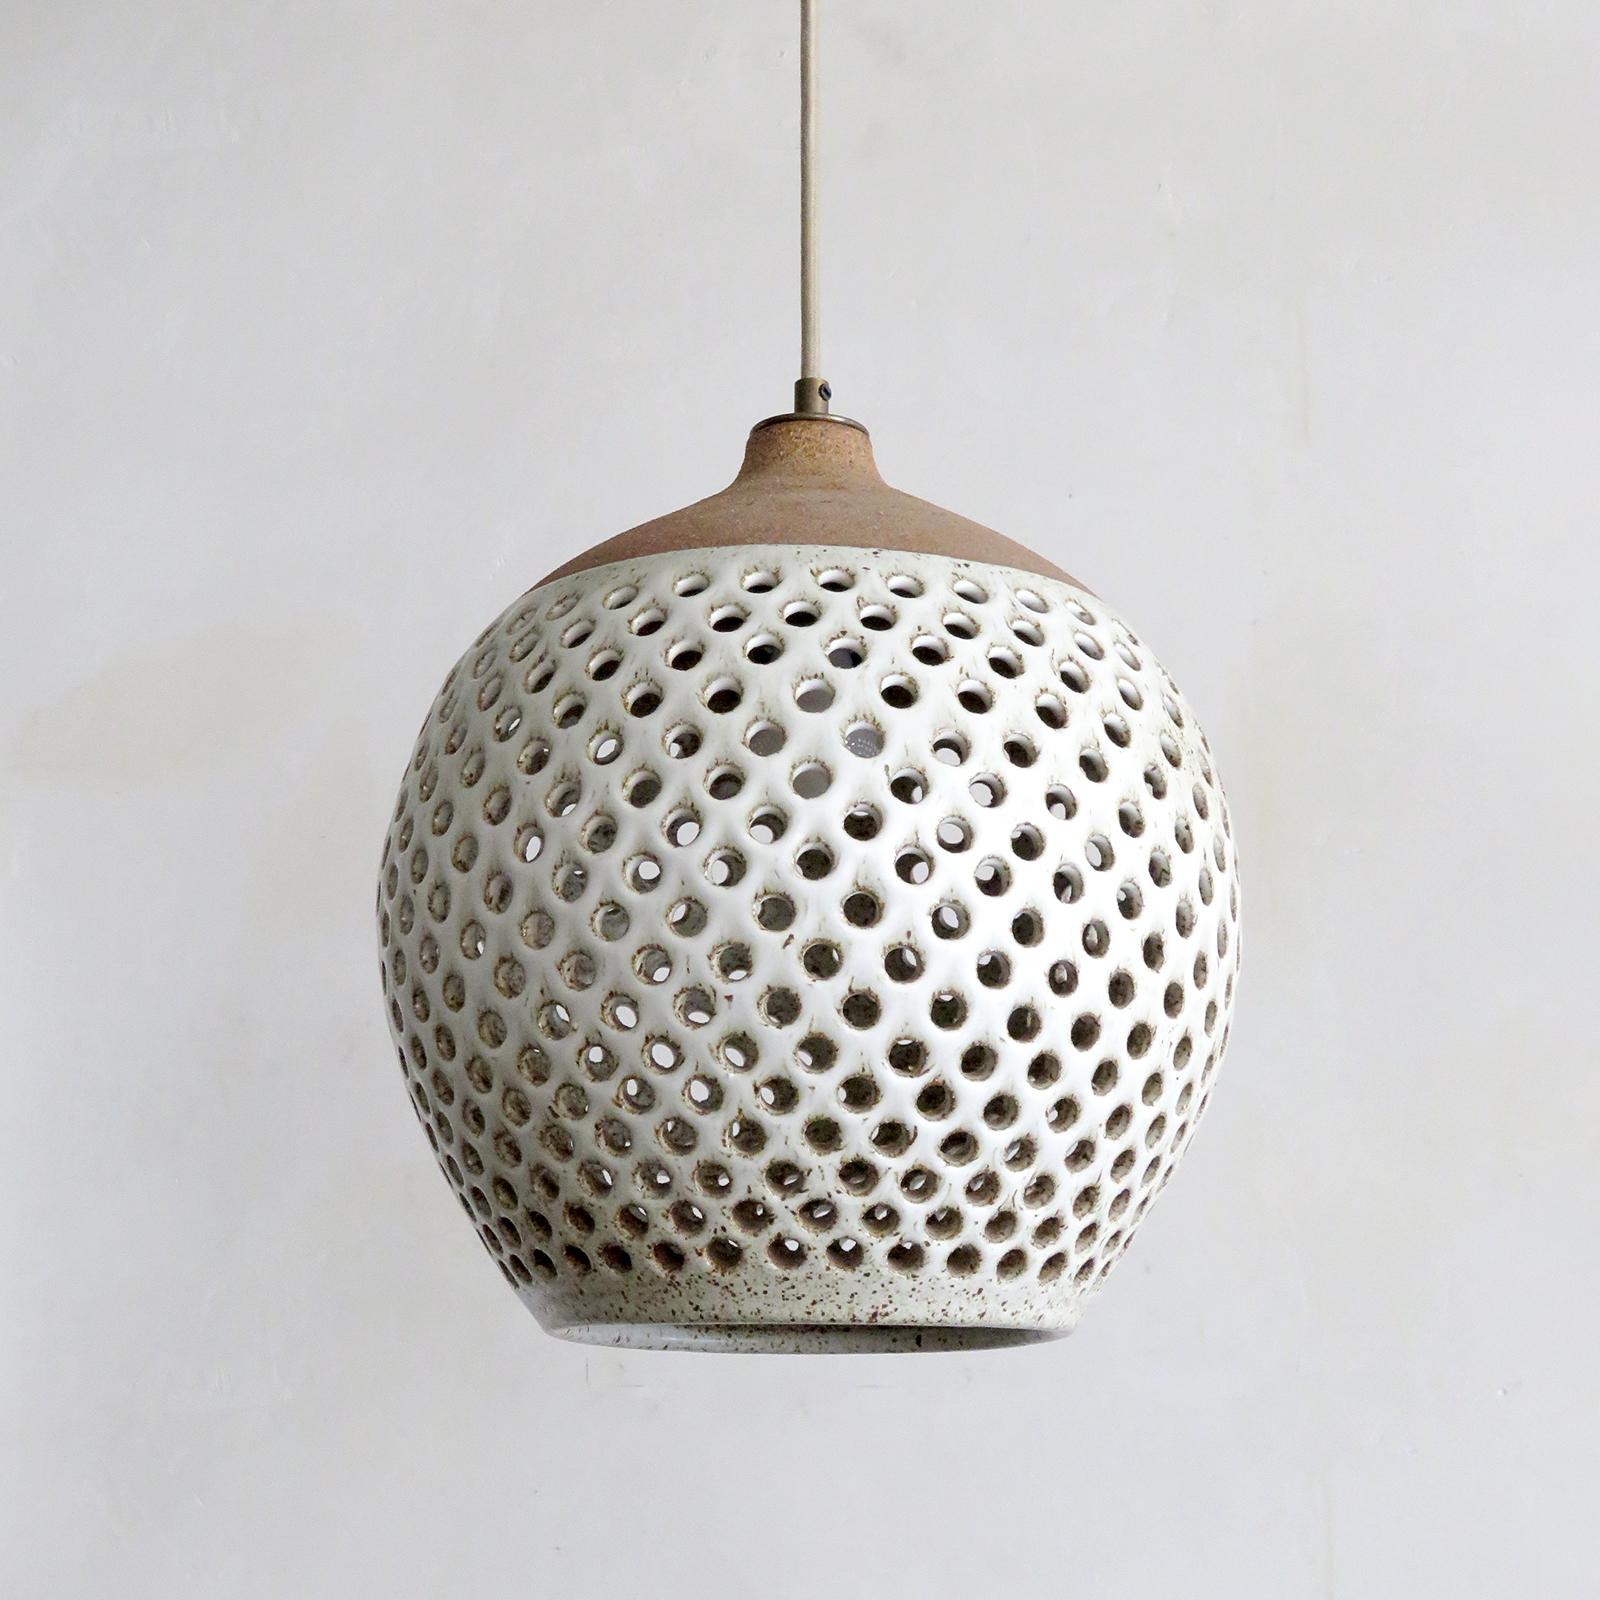 Wonderful ceramic pendant light No. L51, designed and handcrafted by Los Angeles based ceramicist Heather Levine. High fired stoneware with speckled matte white glaze on a cork colored clay body with decorative circles cut out to expose light in